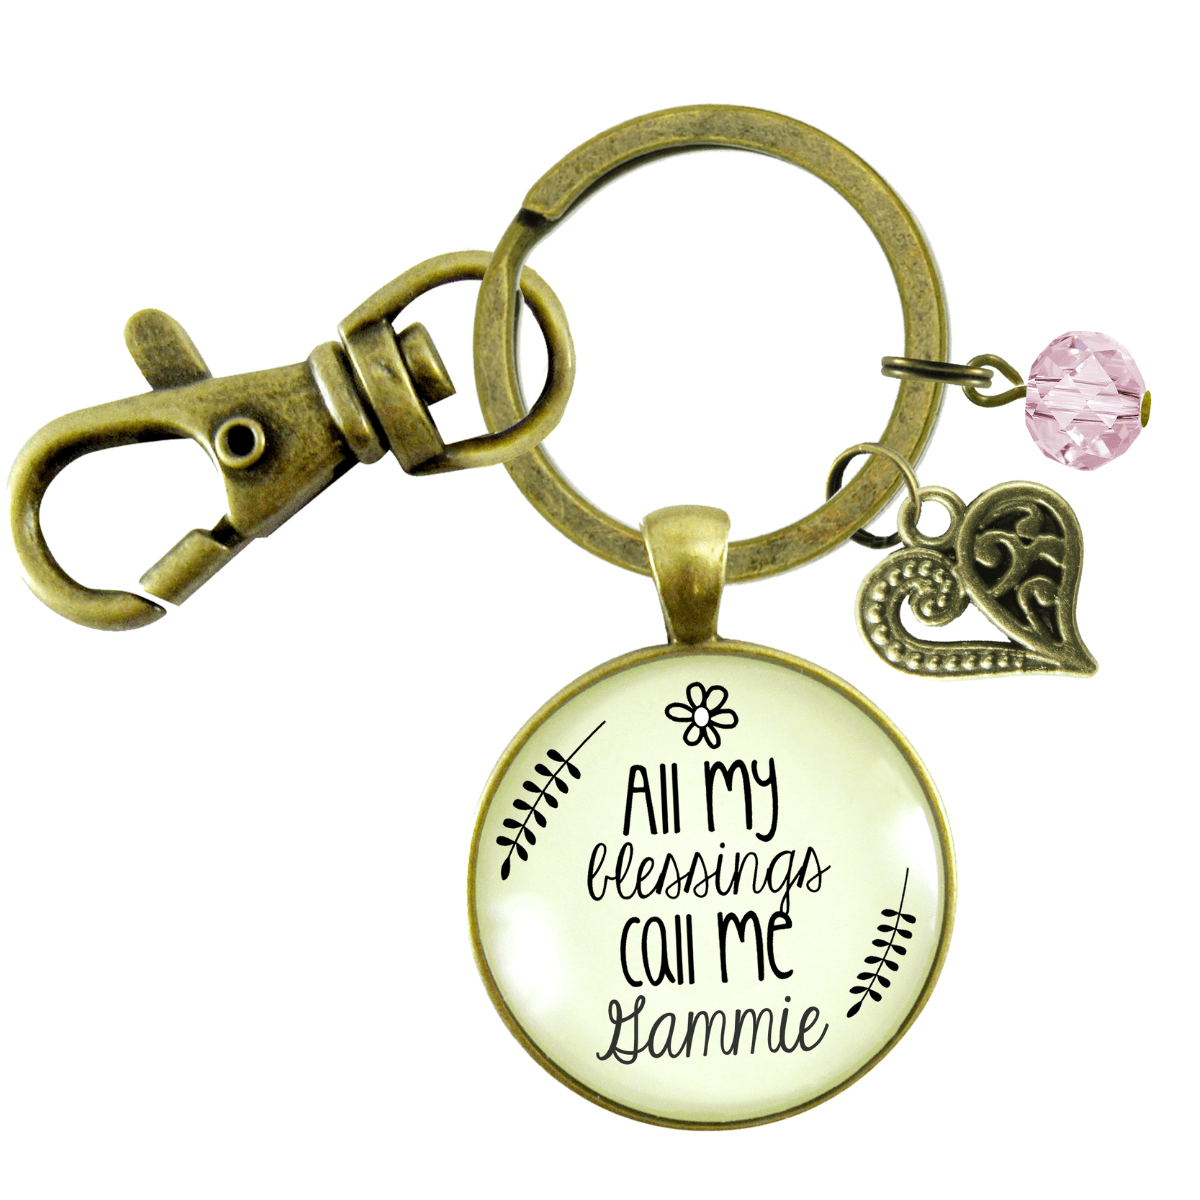 Gammie Keychain All My Blessings Southern Grandma Womens Family Gift Jewelry - Gutsy Goodness Handmade Jewelry;Gammie Keychain All My Blessings Southern Grandma Womens Family Gift Jewelry - Gutsy Goodness Handmade Jewelry Gifts